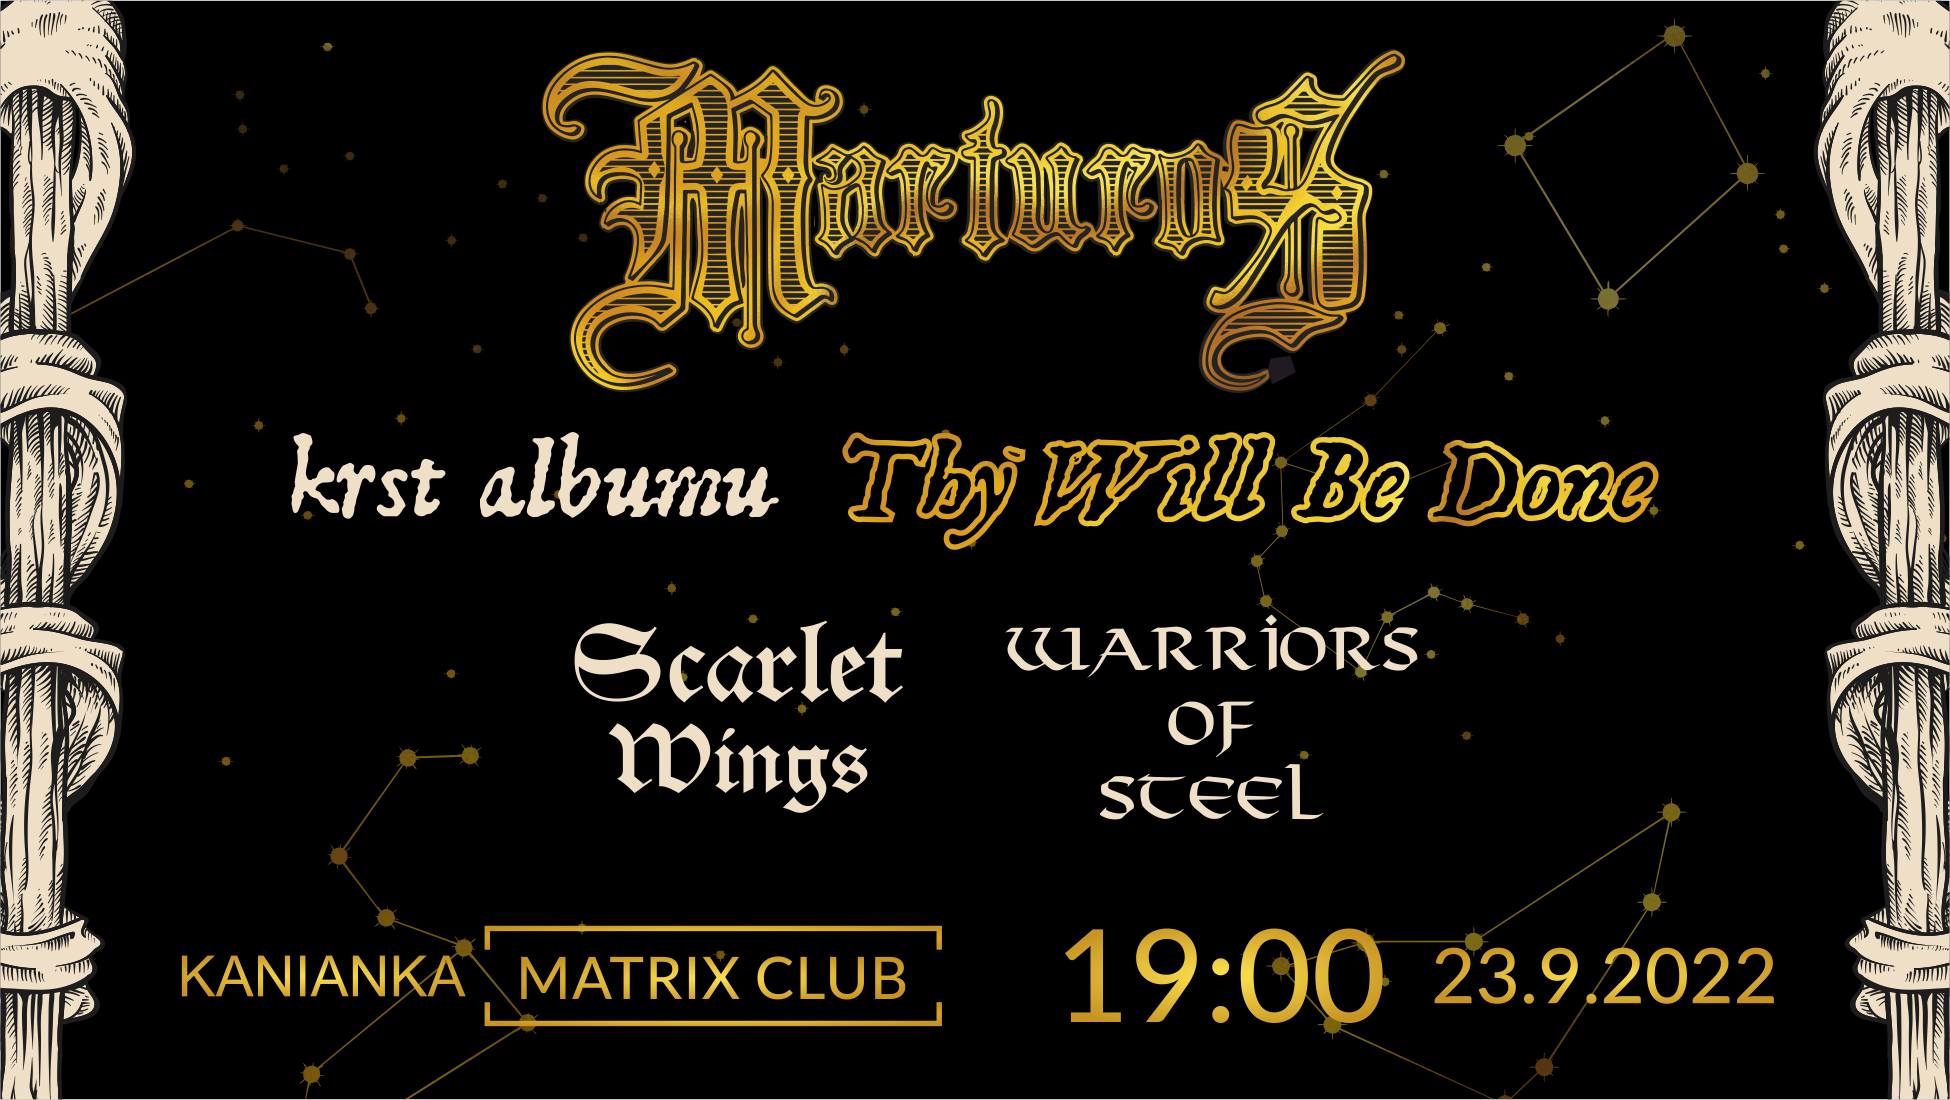 Marturos - Krst albumu "Thy Will Be Done" + Scarlet Wings a Warriors of Steel